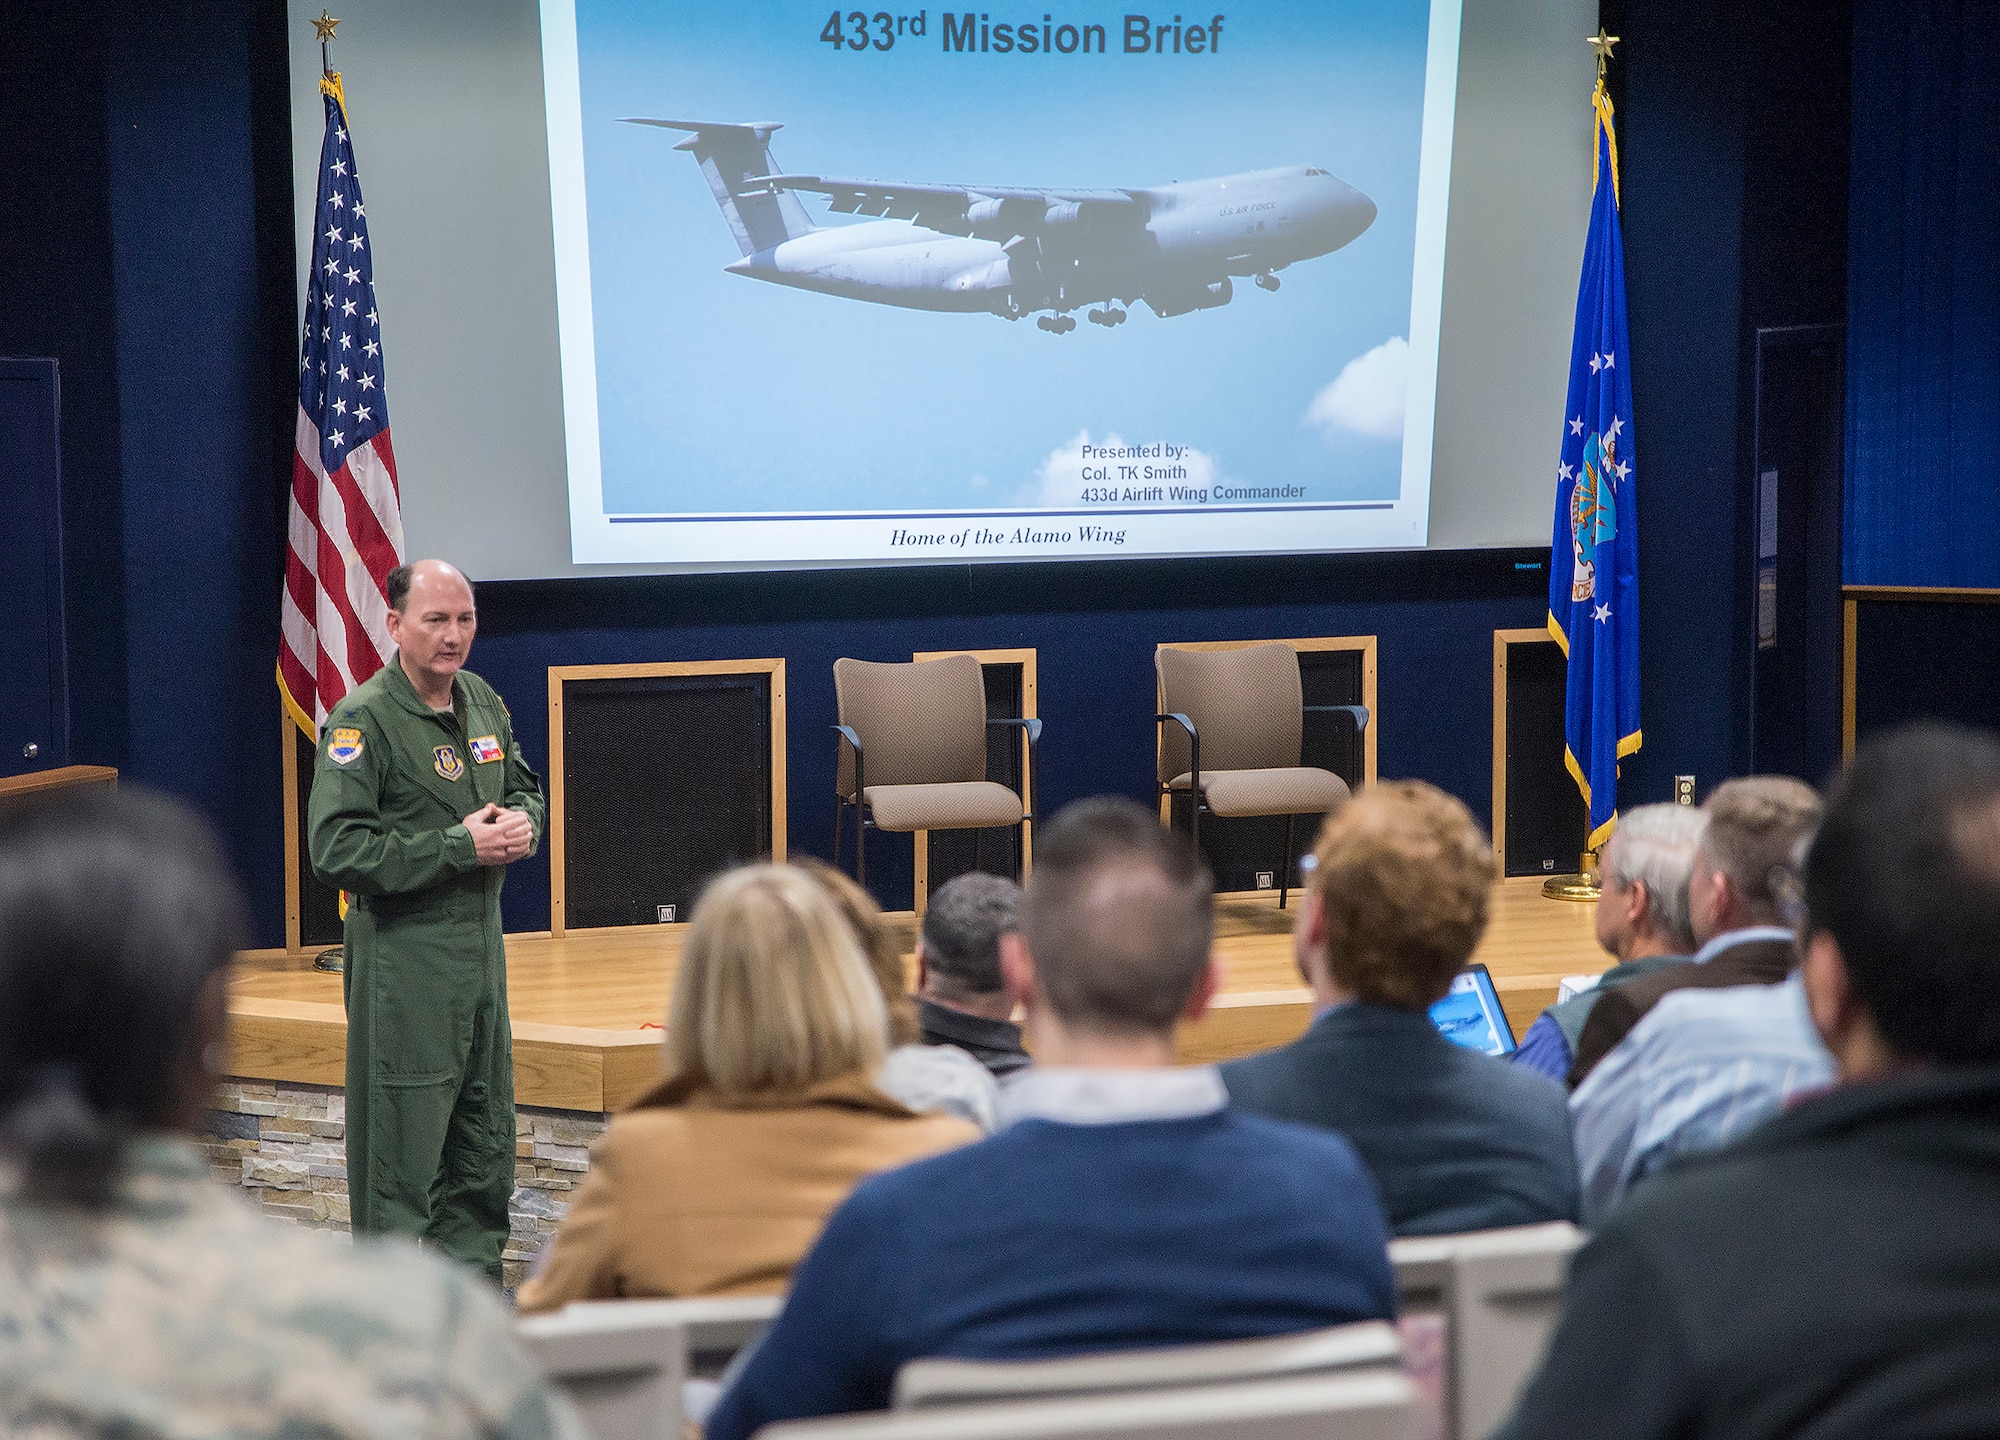 Col. Thomas K. Smith, Jr., 433rd Airlift Wing commander, gives the wing’s mission brief to nearly 30 civic leaders from Joint Base McGuire-Dix-Lakehurst, New Jersey Nov. 30, 2016 at Joint Base San Antonio-Lackland, Texas. The civic leaders also toured a C-5M Super Galaxy aircraft, the Medical Training, and Education Campus at JBSA-Ft. Sam Houston, and the Center for the Intrepid. (U.S. Air Force photo by Benjamin Fiske)